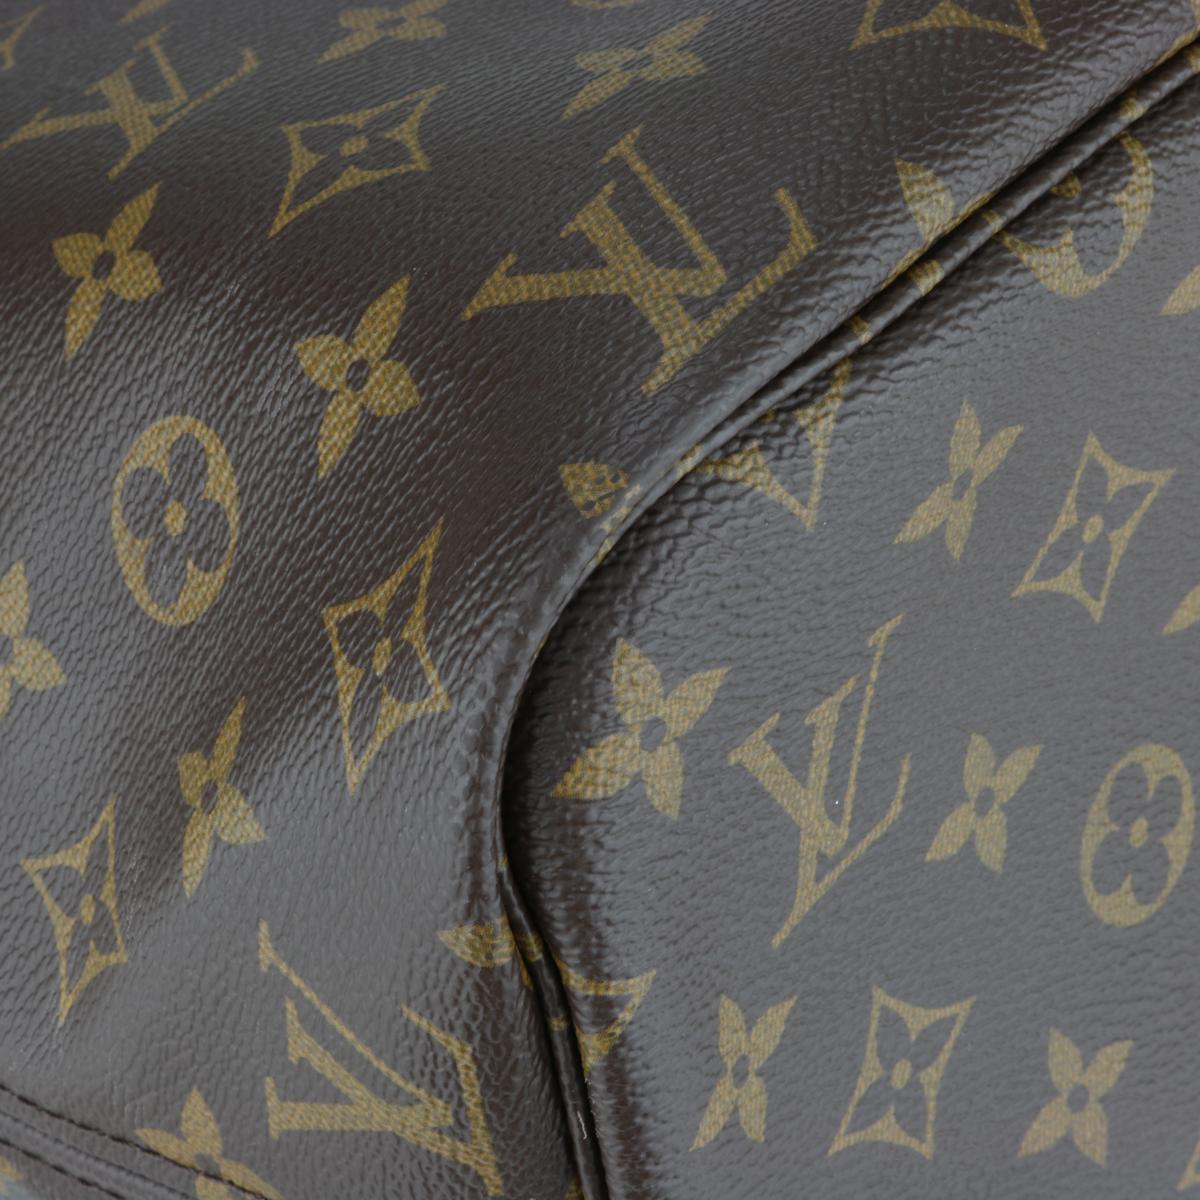 Louis Vuitton Neverfull MM Bag in Monogram with Beige Interior 2016 4